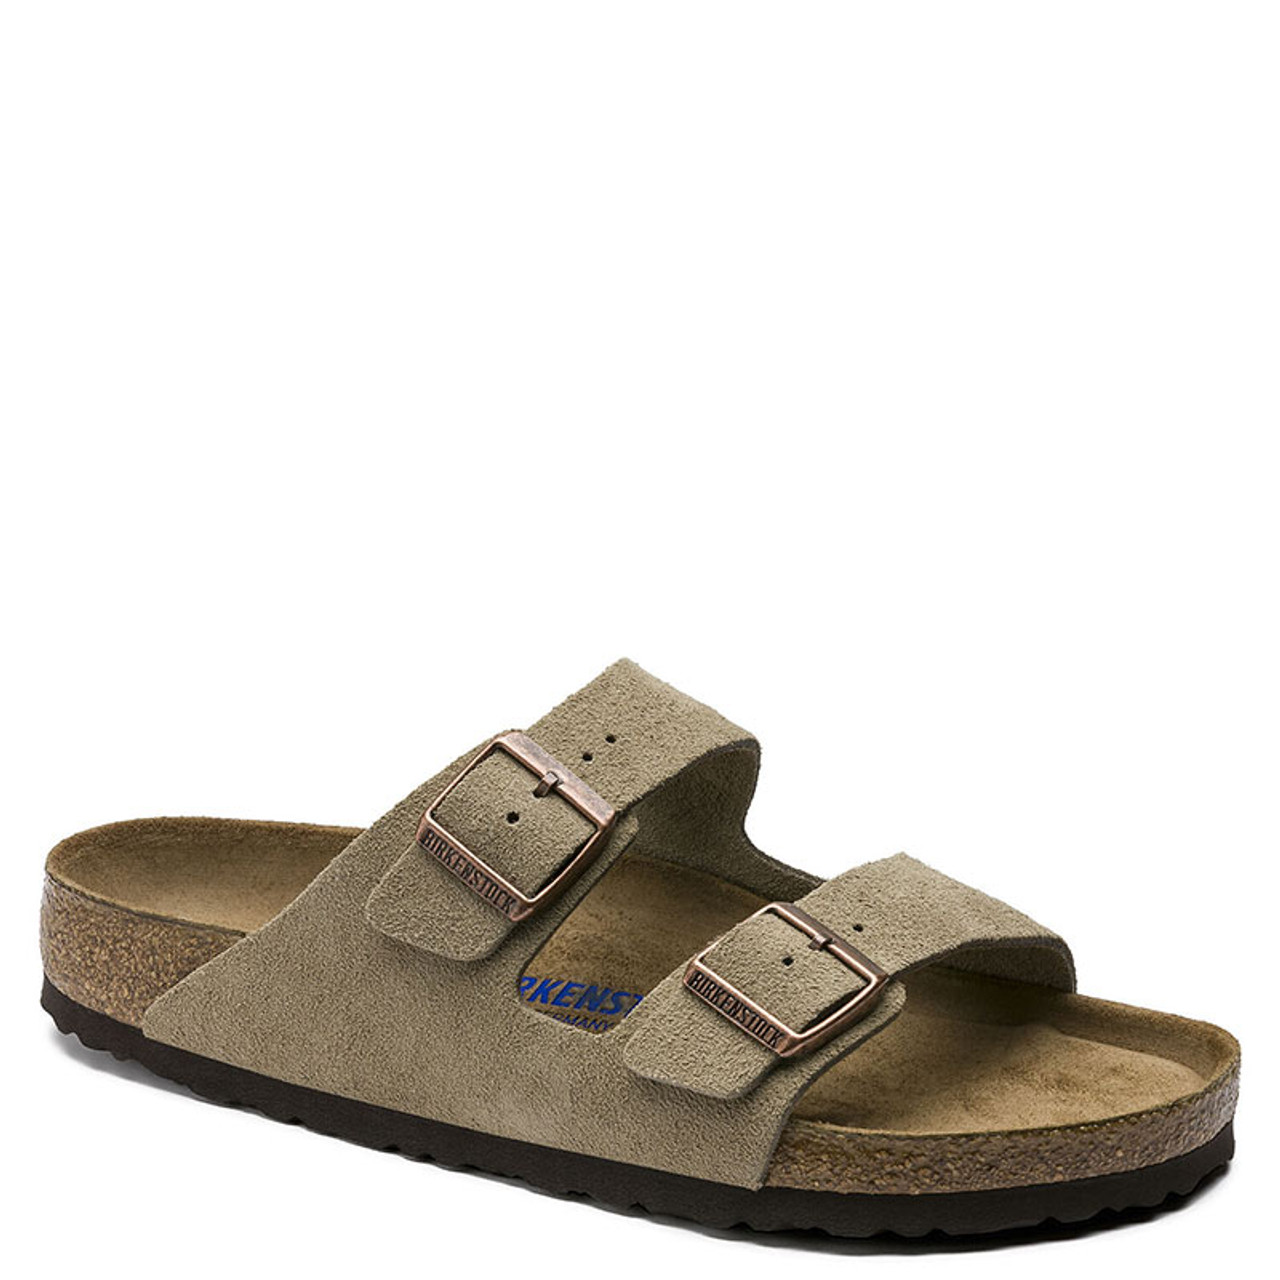 Edelsteen Goodwill micro Birkenstock 951301 Women's ARIZONA SOFT FOOTBED Taupe Suede Sandals -  Family Footwear Center